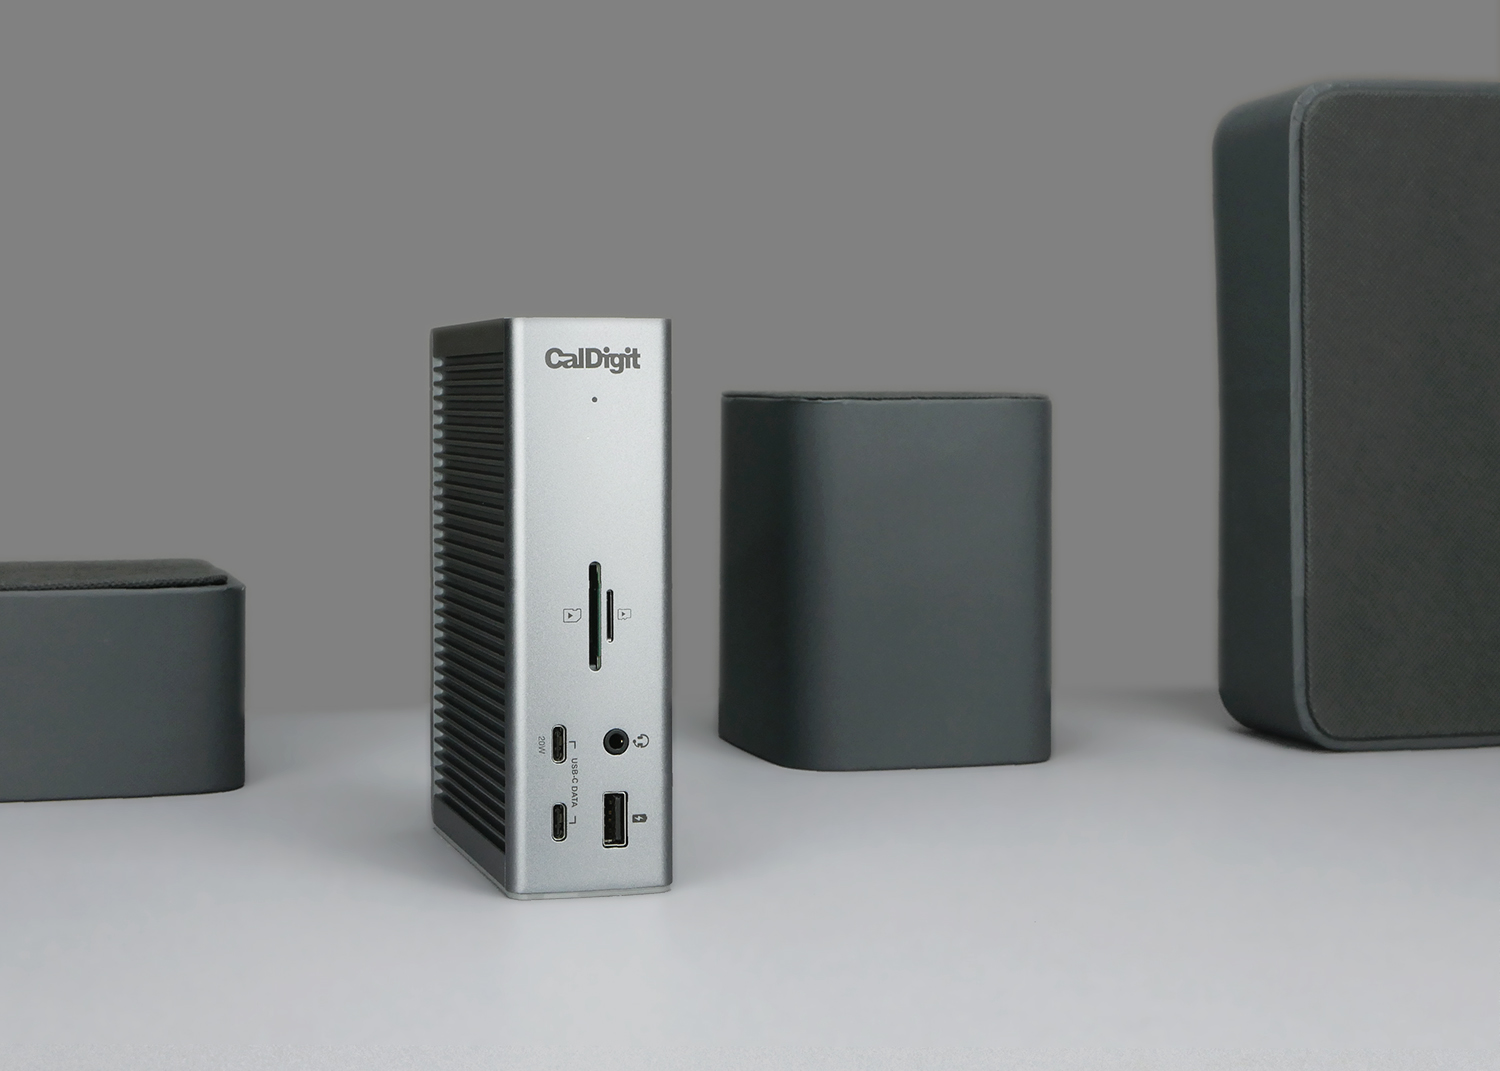 CalDigit TS4 Thunderbolt hub review: The dock of our dreams